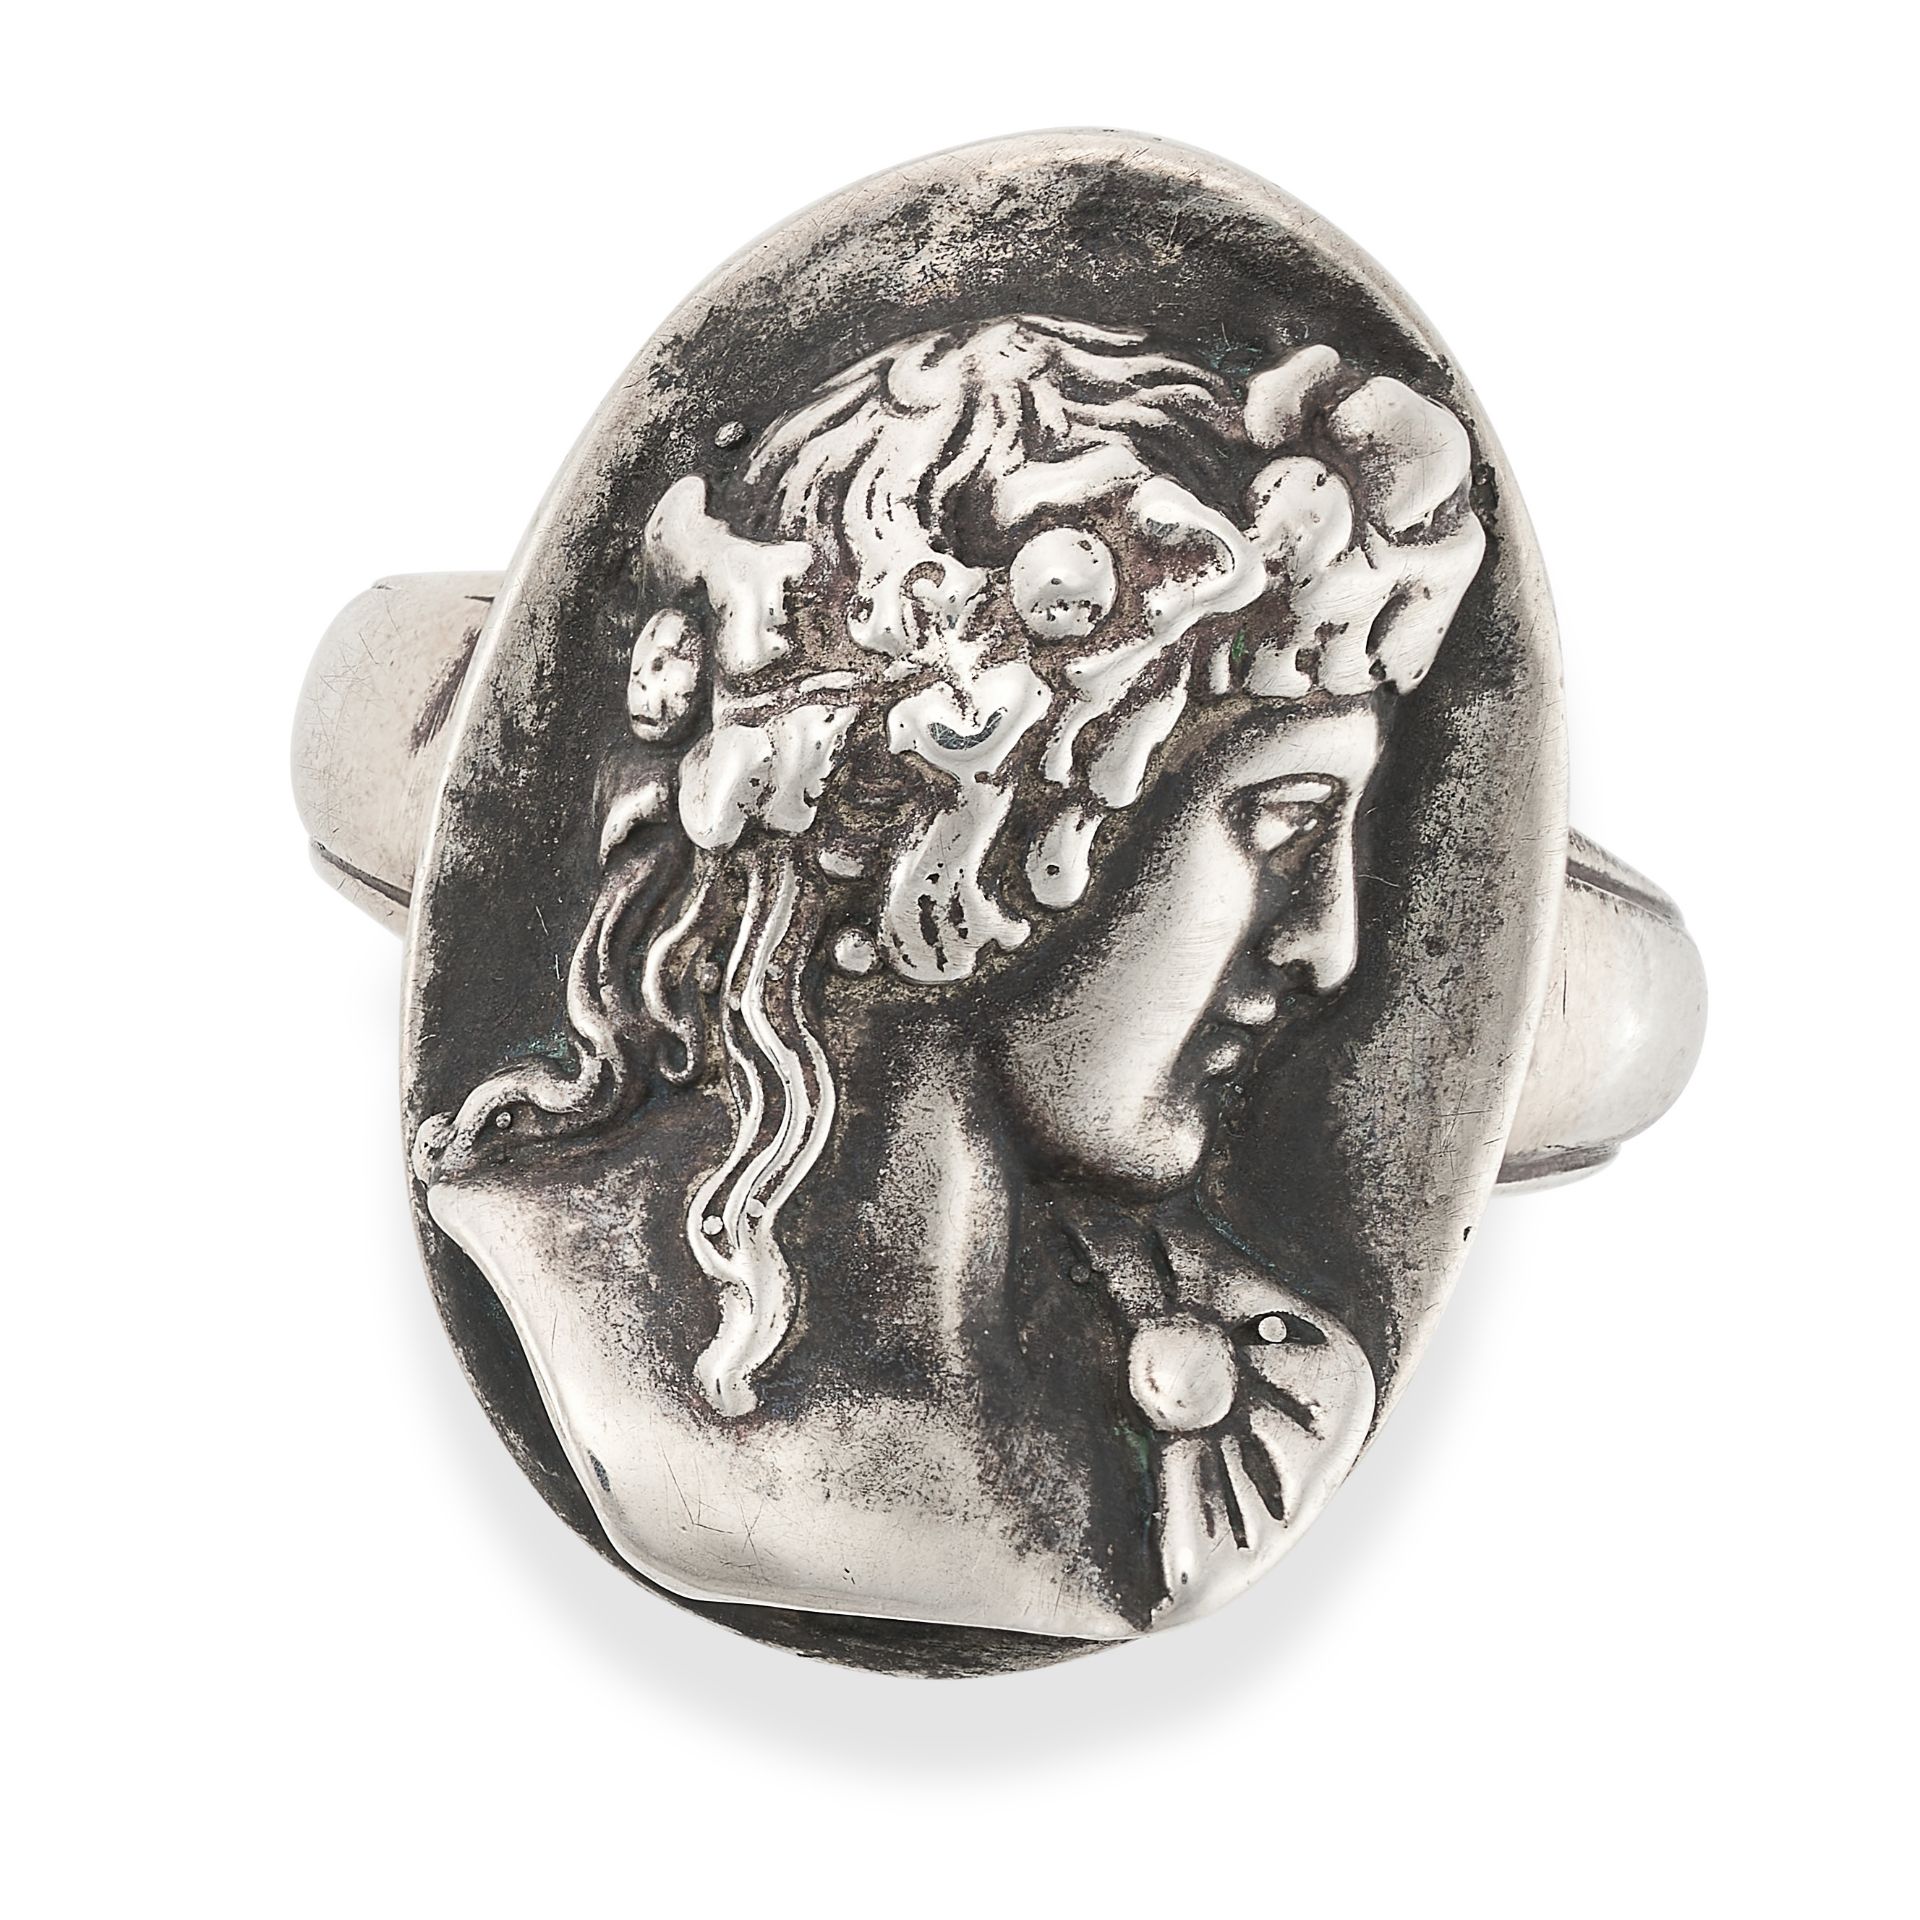 NO RESERVE - A CAMEO RING in silver, depicting the profile in relief of a Classical male figure,